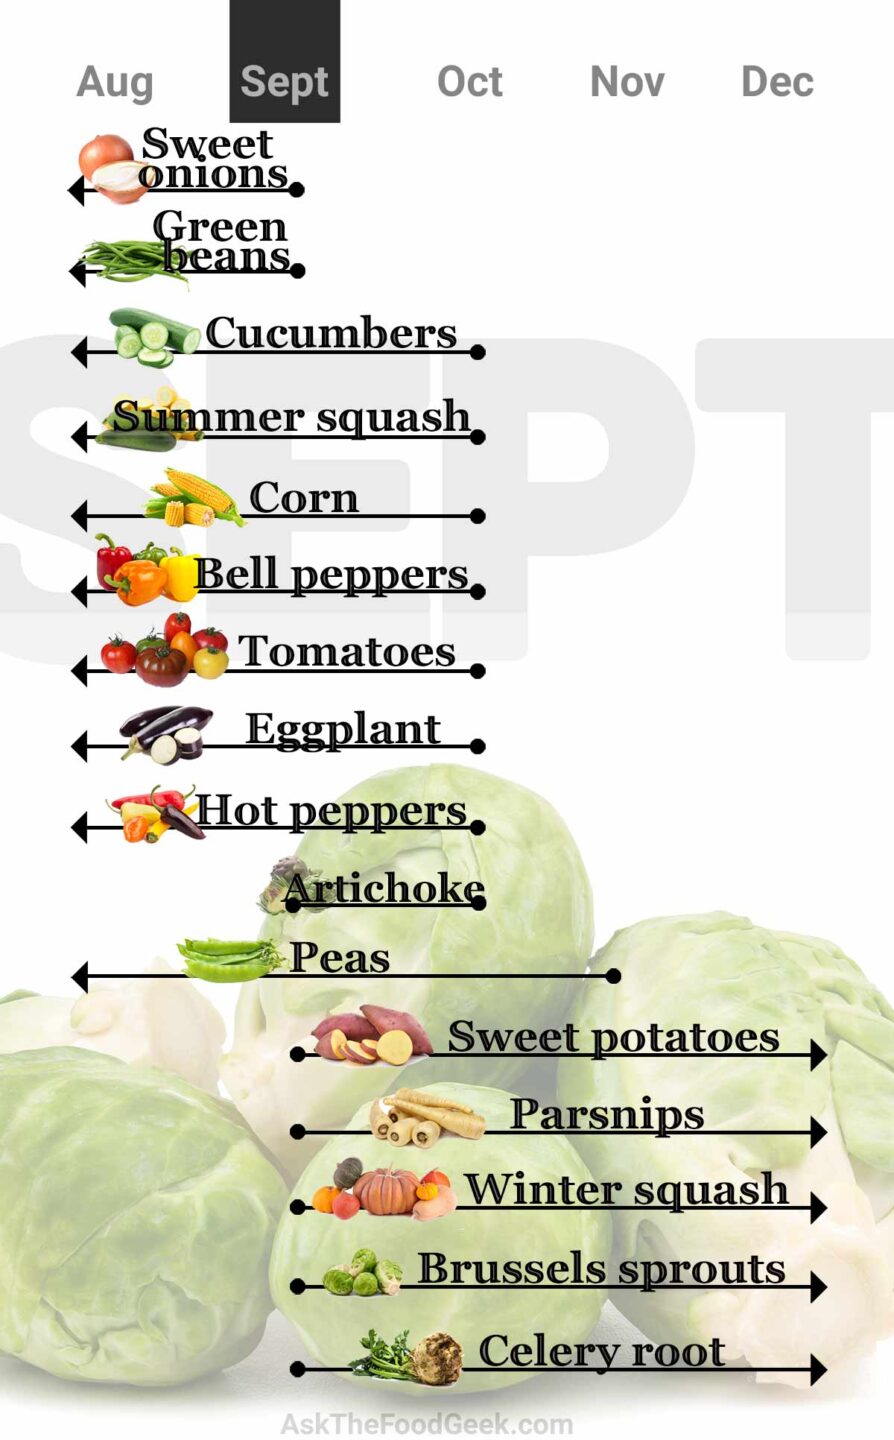 September vegetables in-season chart: Onions, green beans, cucumbers, summer squash, corn, bell peppers, tomatoes, eggplant, hot peppers, artichokes, peas, sweet potatoes, parsnips, winter squash, brussels sprouts, and celery root.